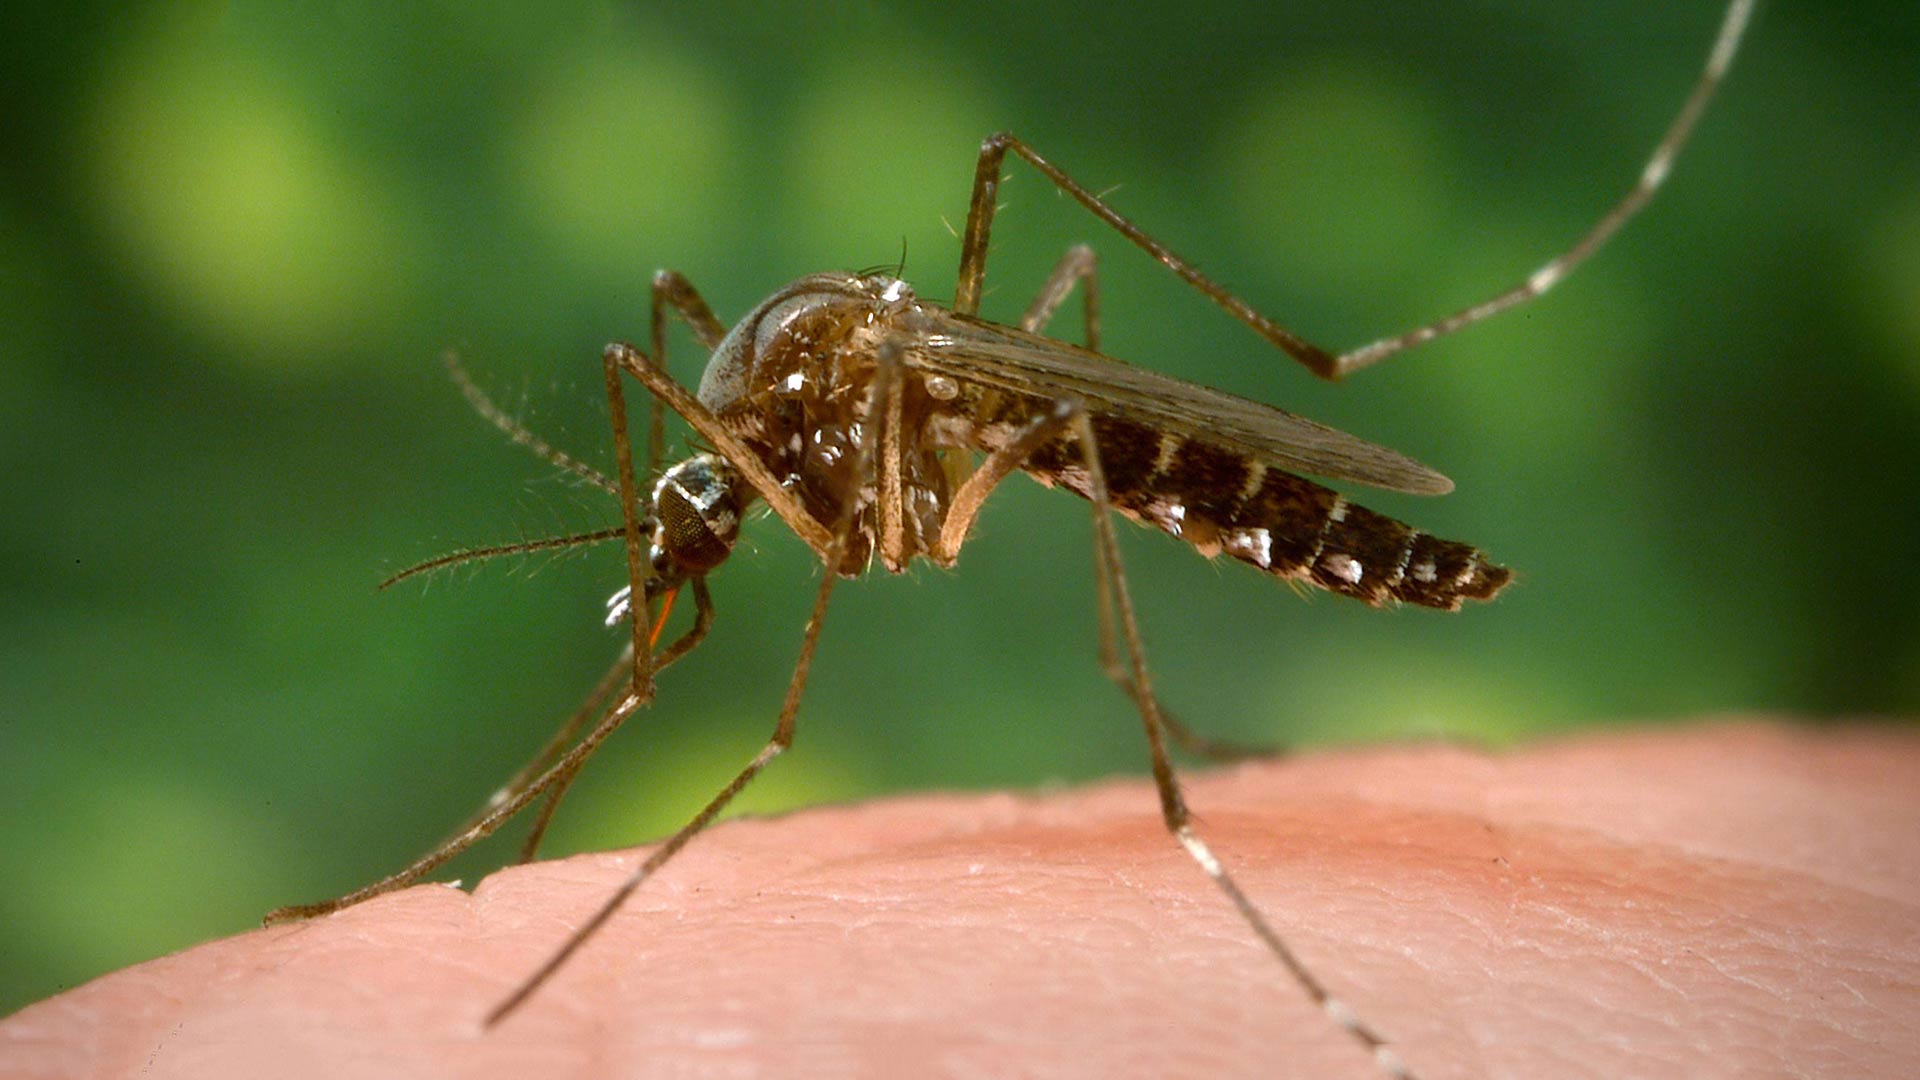 Mosquitoes are historically among the worst carriers of infectious disease globally.
